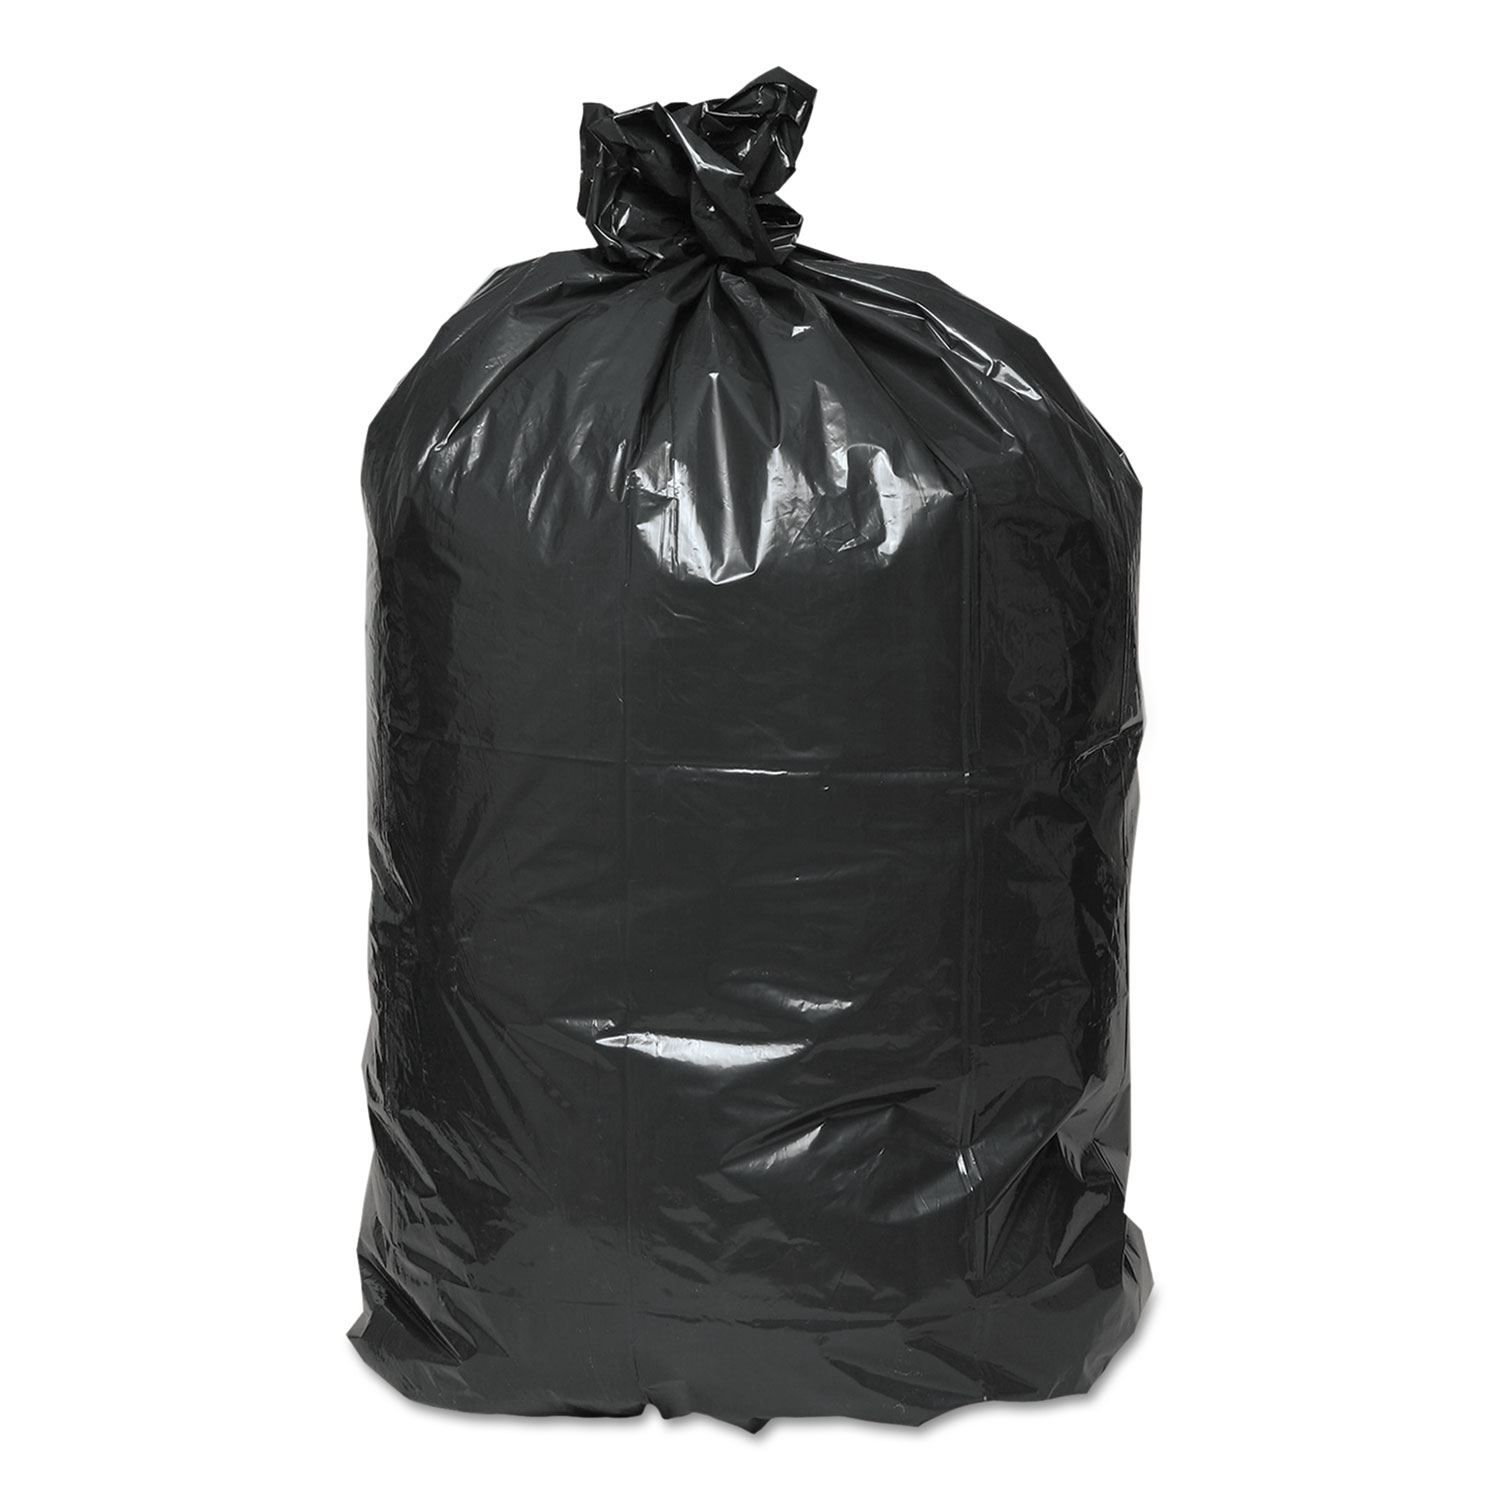 Recycled Can Liners, 40-45gal, 2mil, 40 x 46, Black, 100/Carton